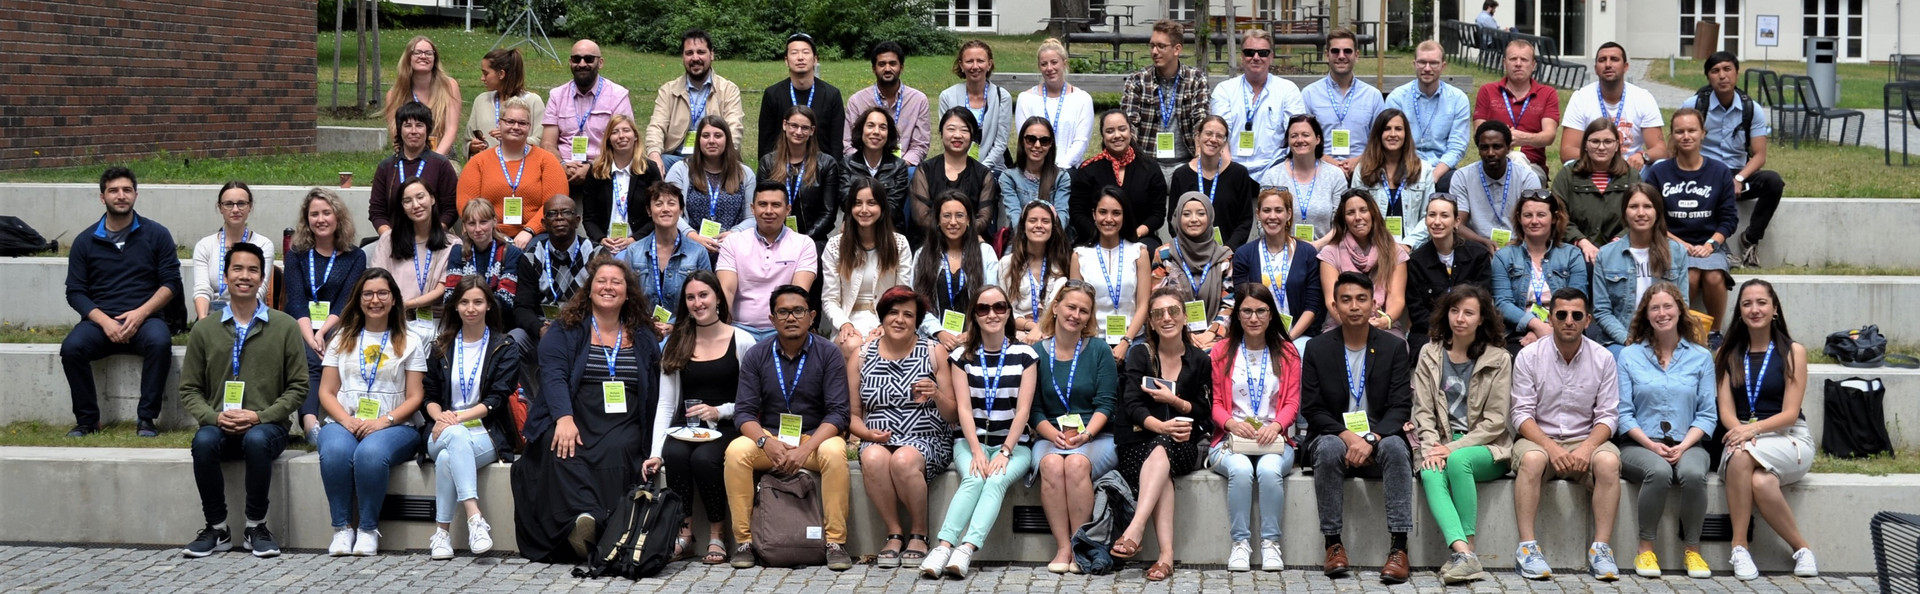 Large group of happy doctoral students at a Summer School in Brno